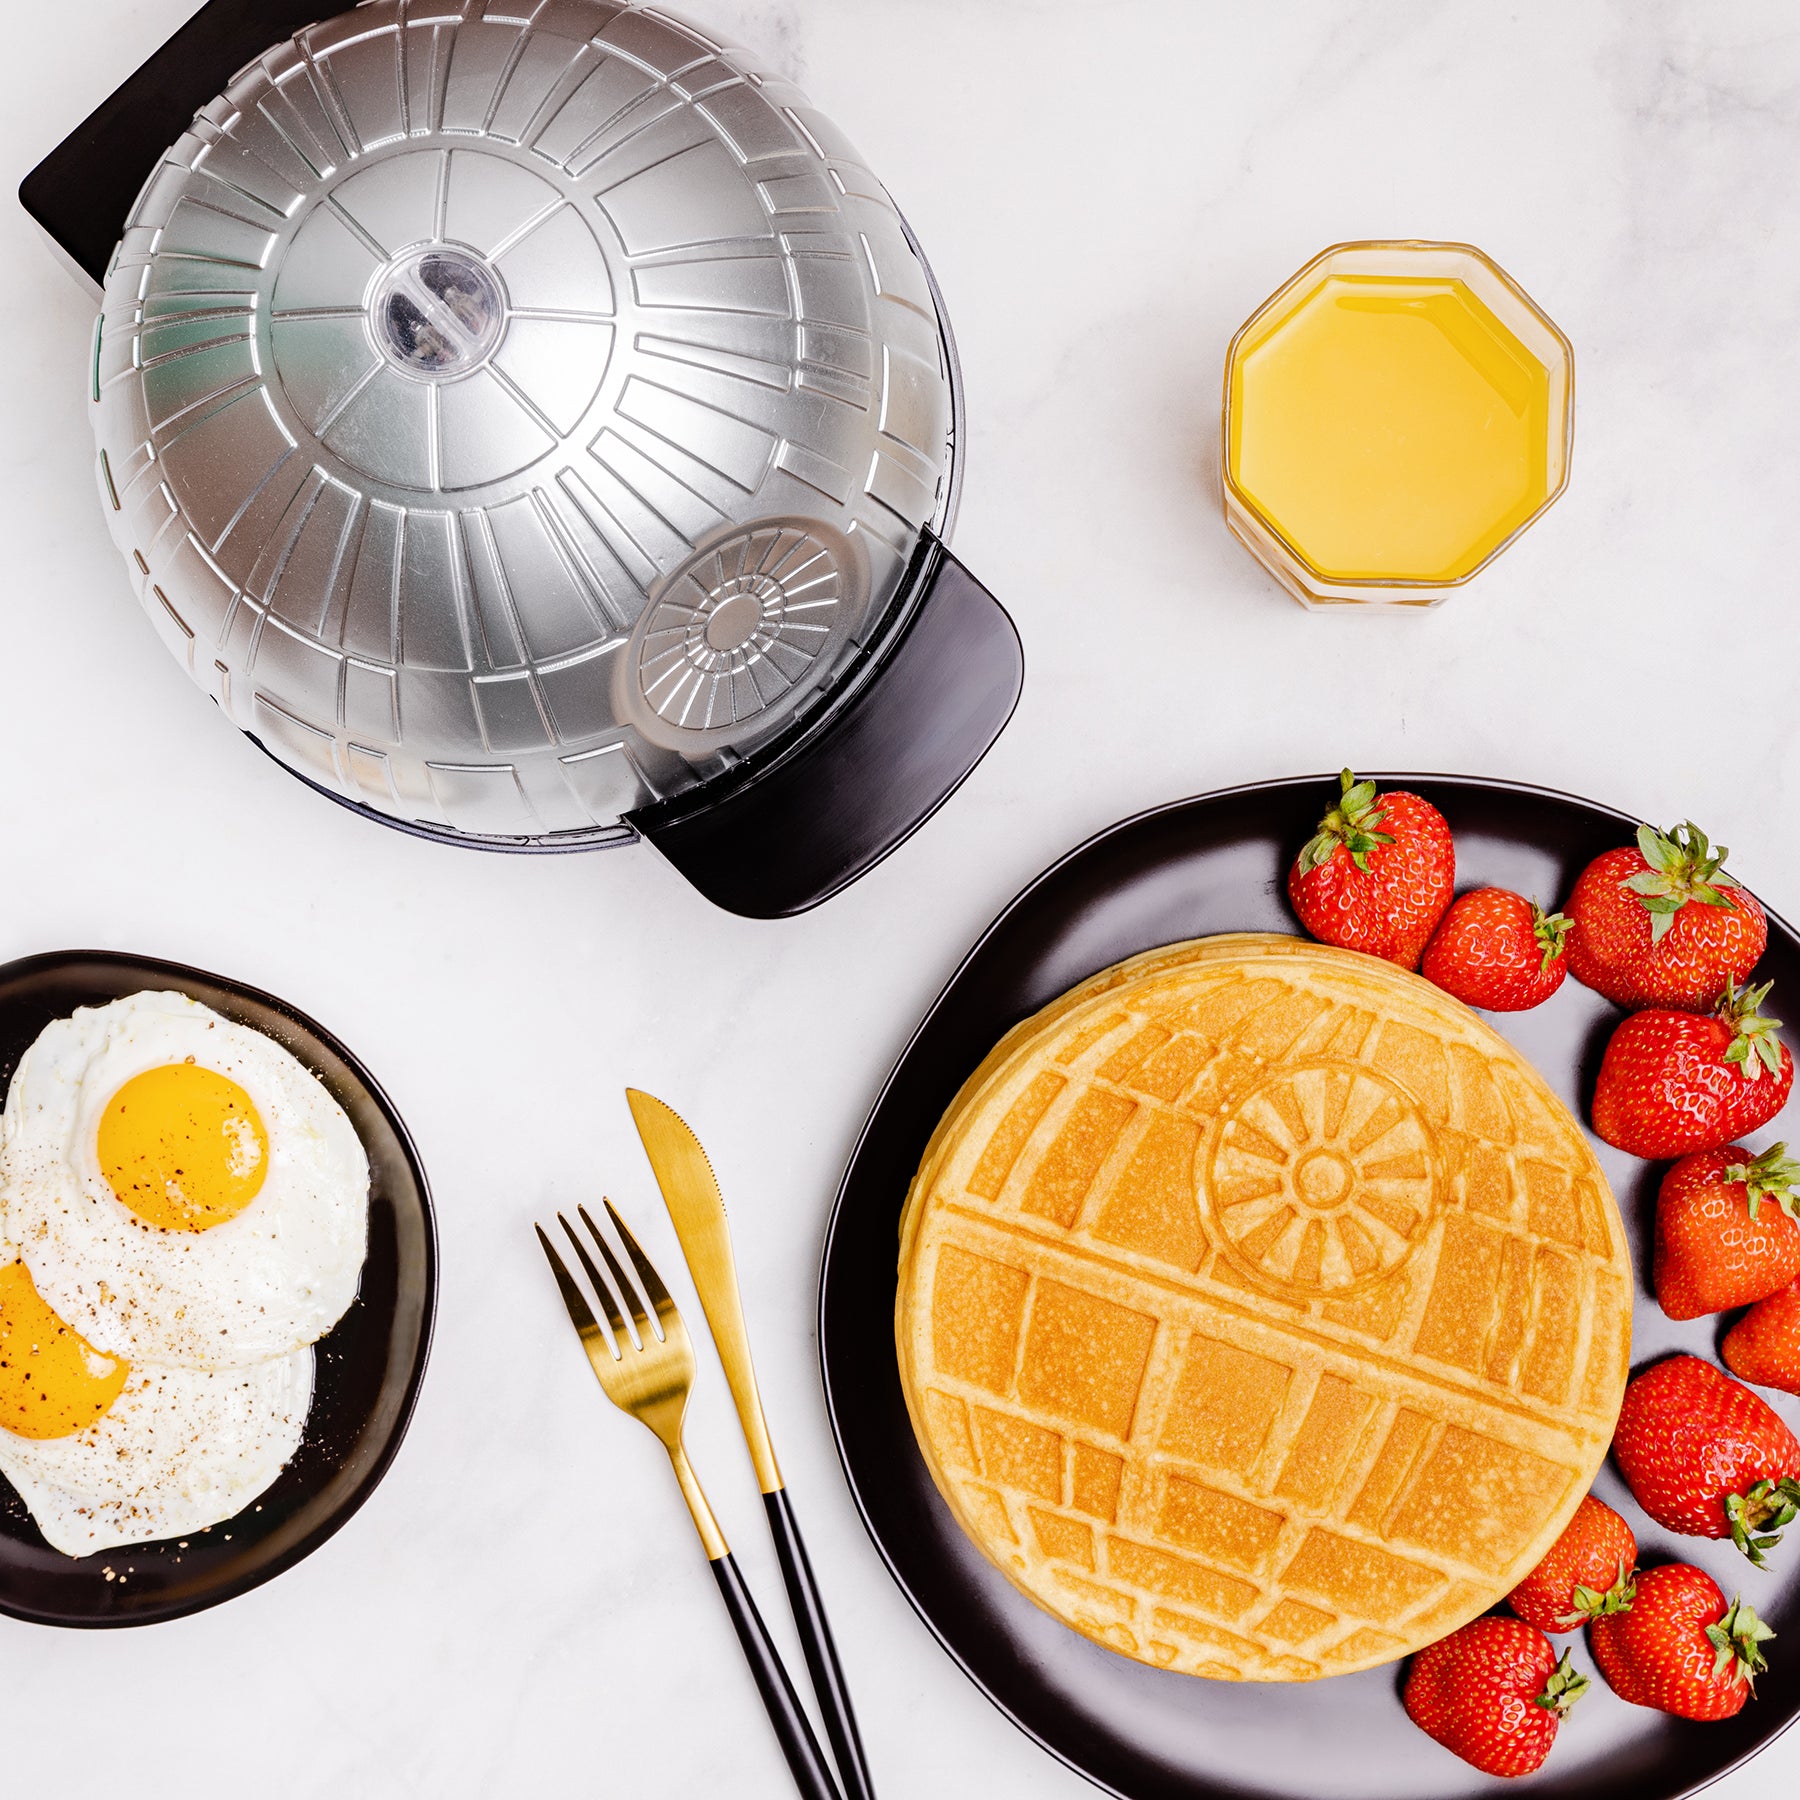 Star Wars Day New Product Launch - Death Star Waffle Maker